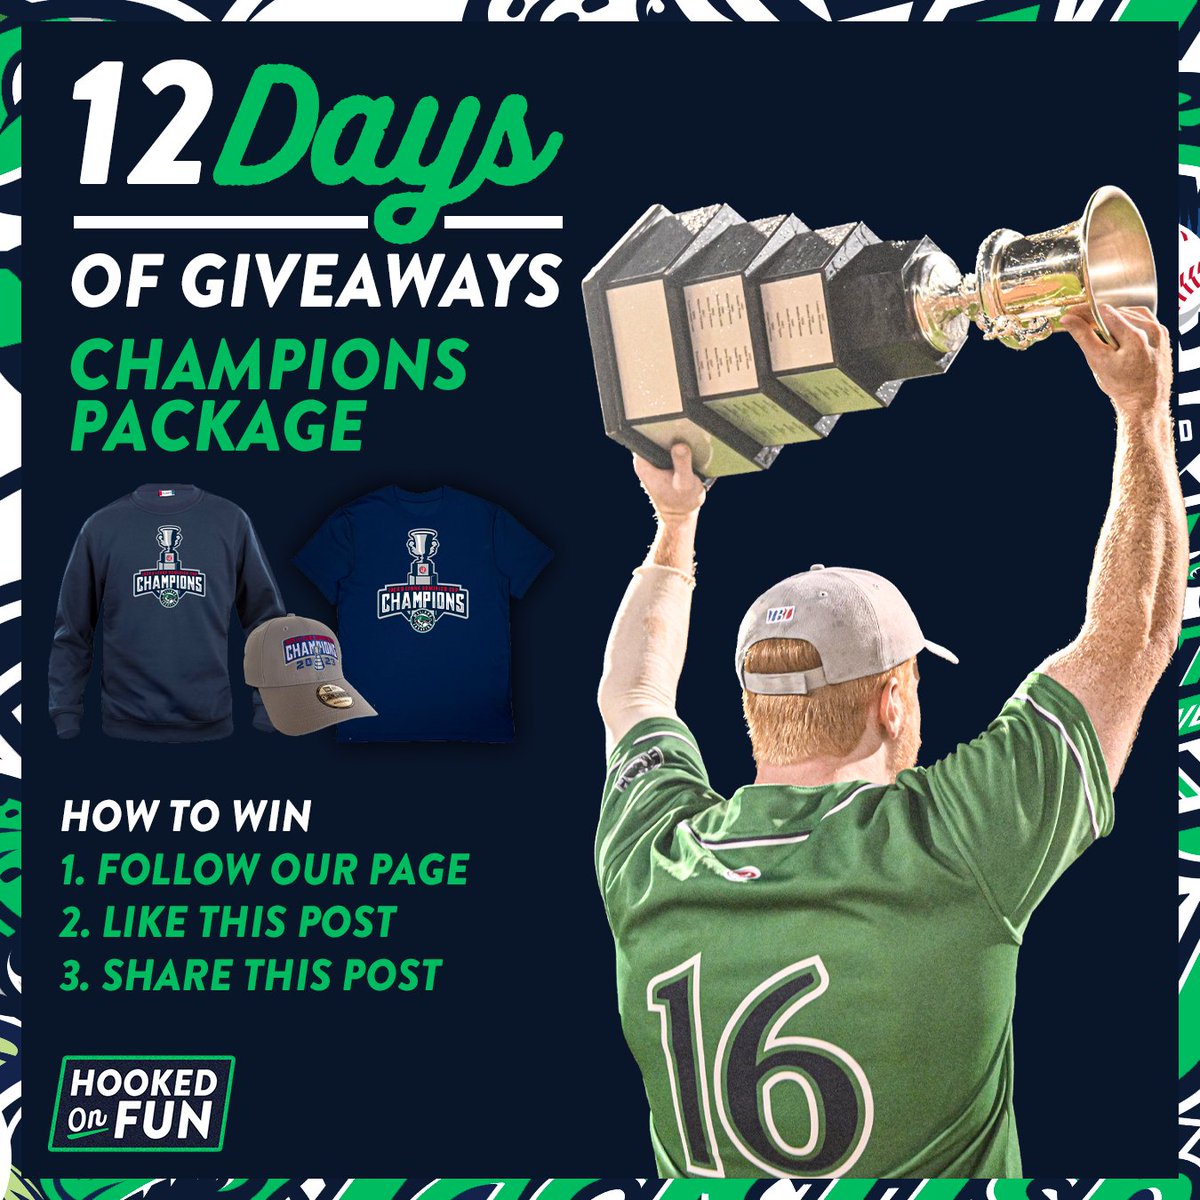 We areee the Chammmpions! Win this Champions Packags which includes a crewneck, hat and t-shirt! 1. Follow us 2. Like this post 3. Share this post Winner to be announced at 4pm